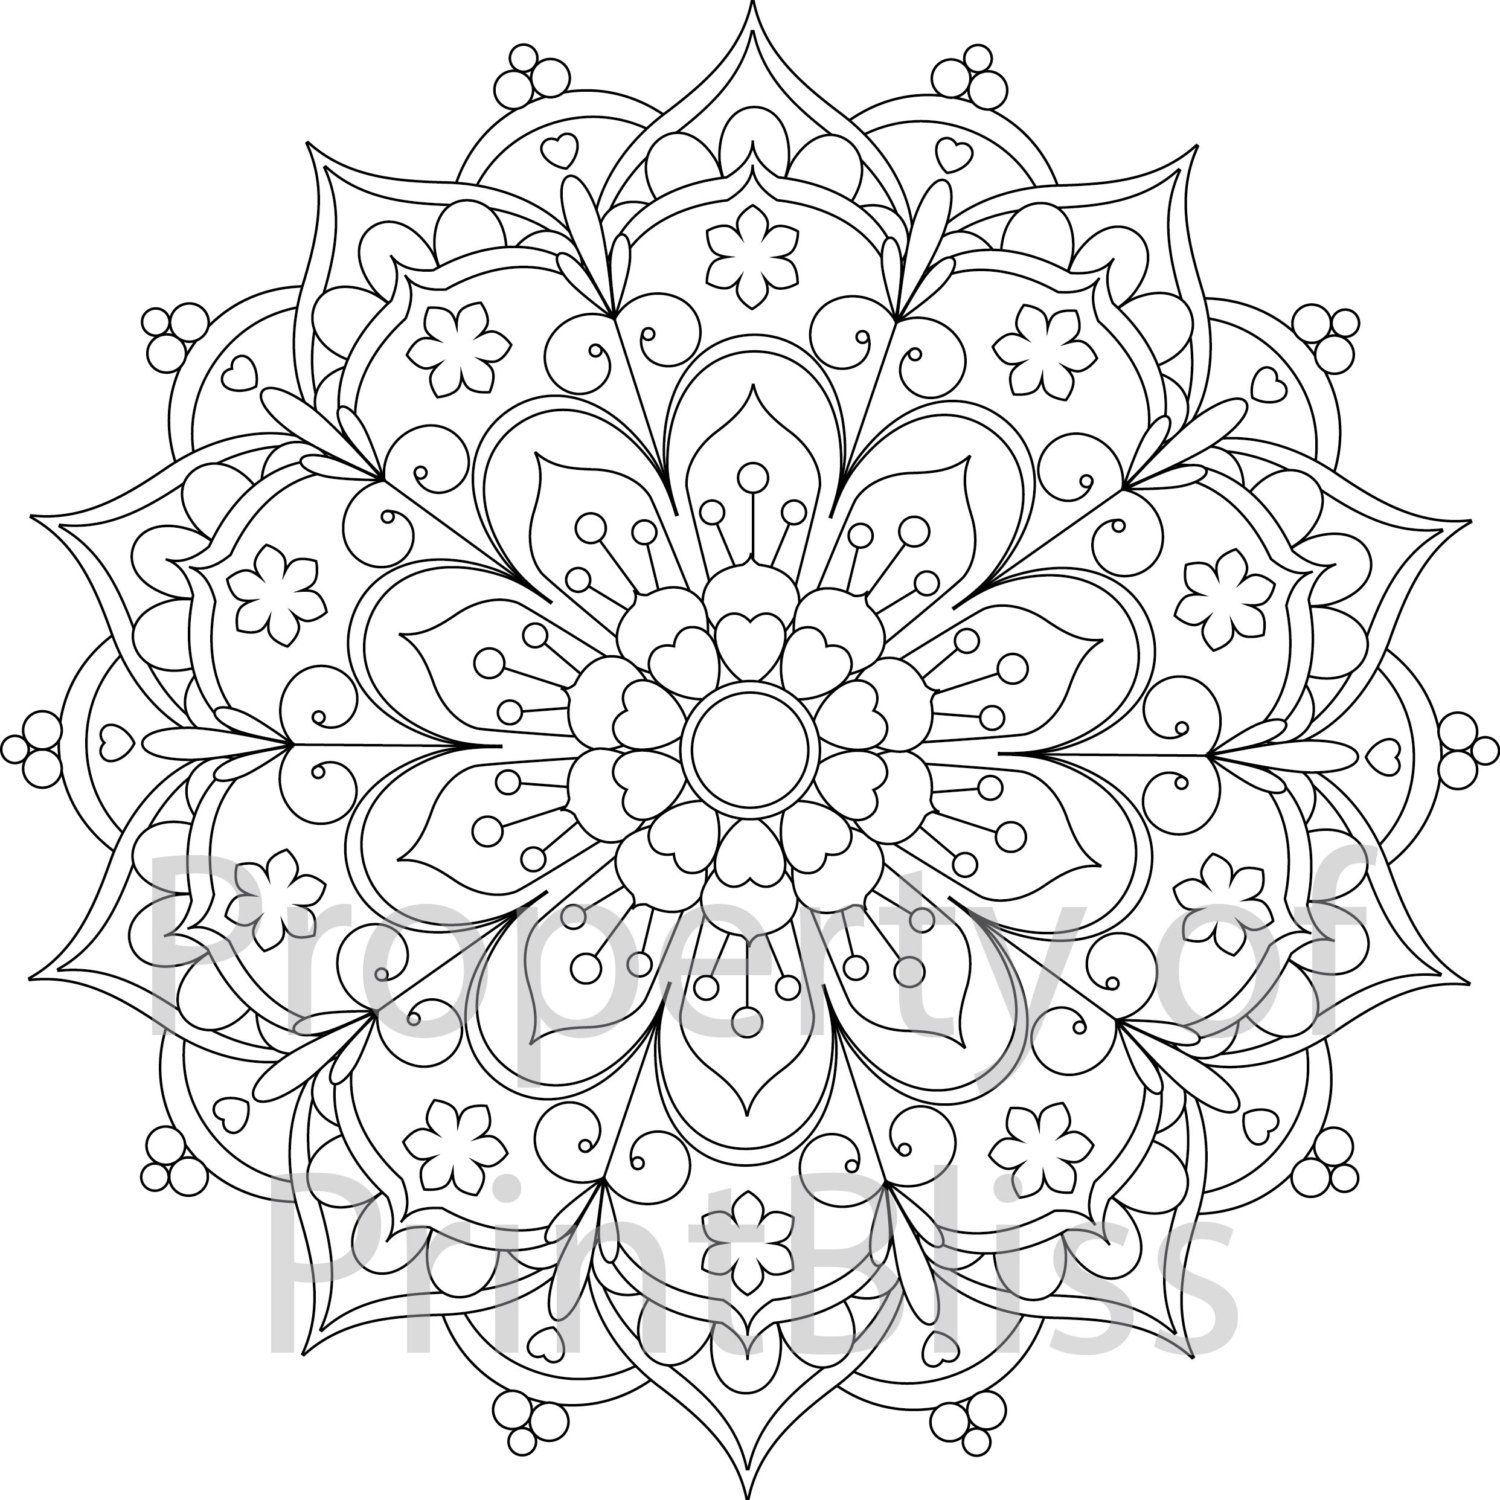 Flower Mandala Printable Coloring Page - Etsy | Abstract coloring pages, Mandala  coloring pages, Mandala coloring books